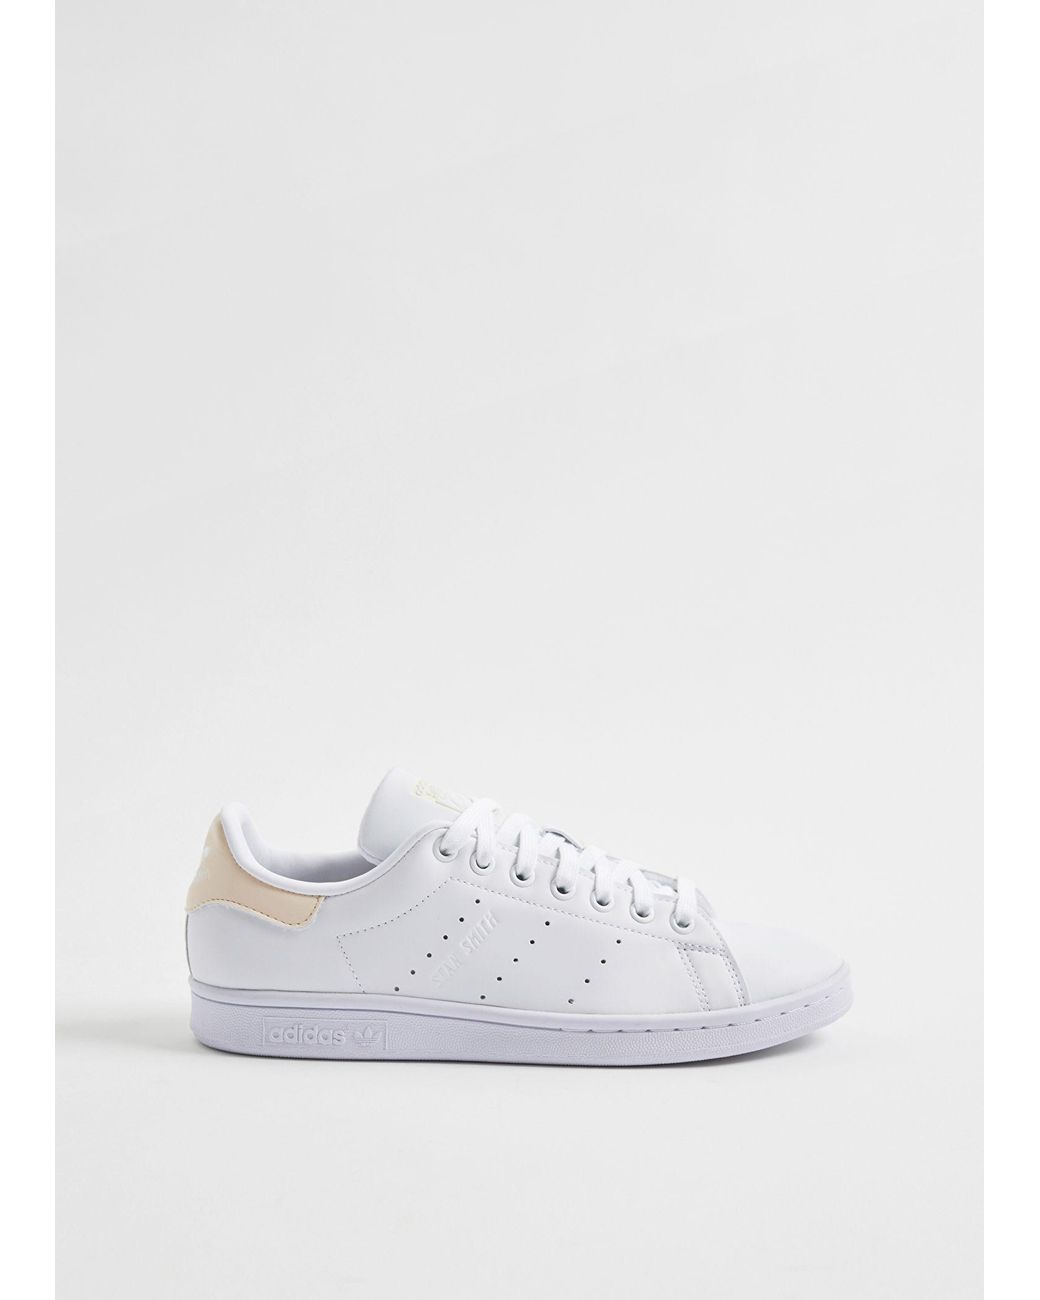 & Other Stories Adidas Stan Smith in White | Lyst Canada